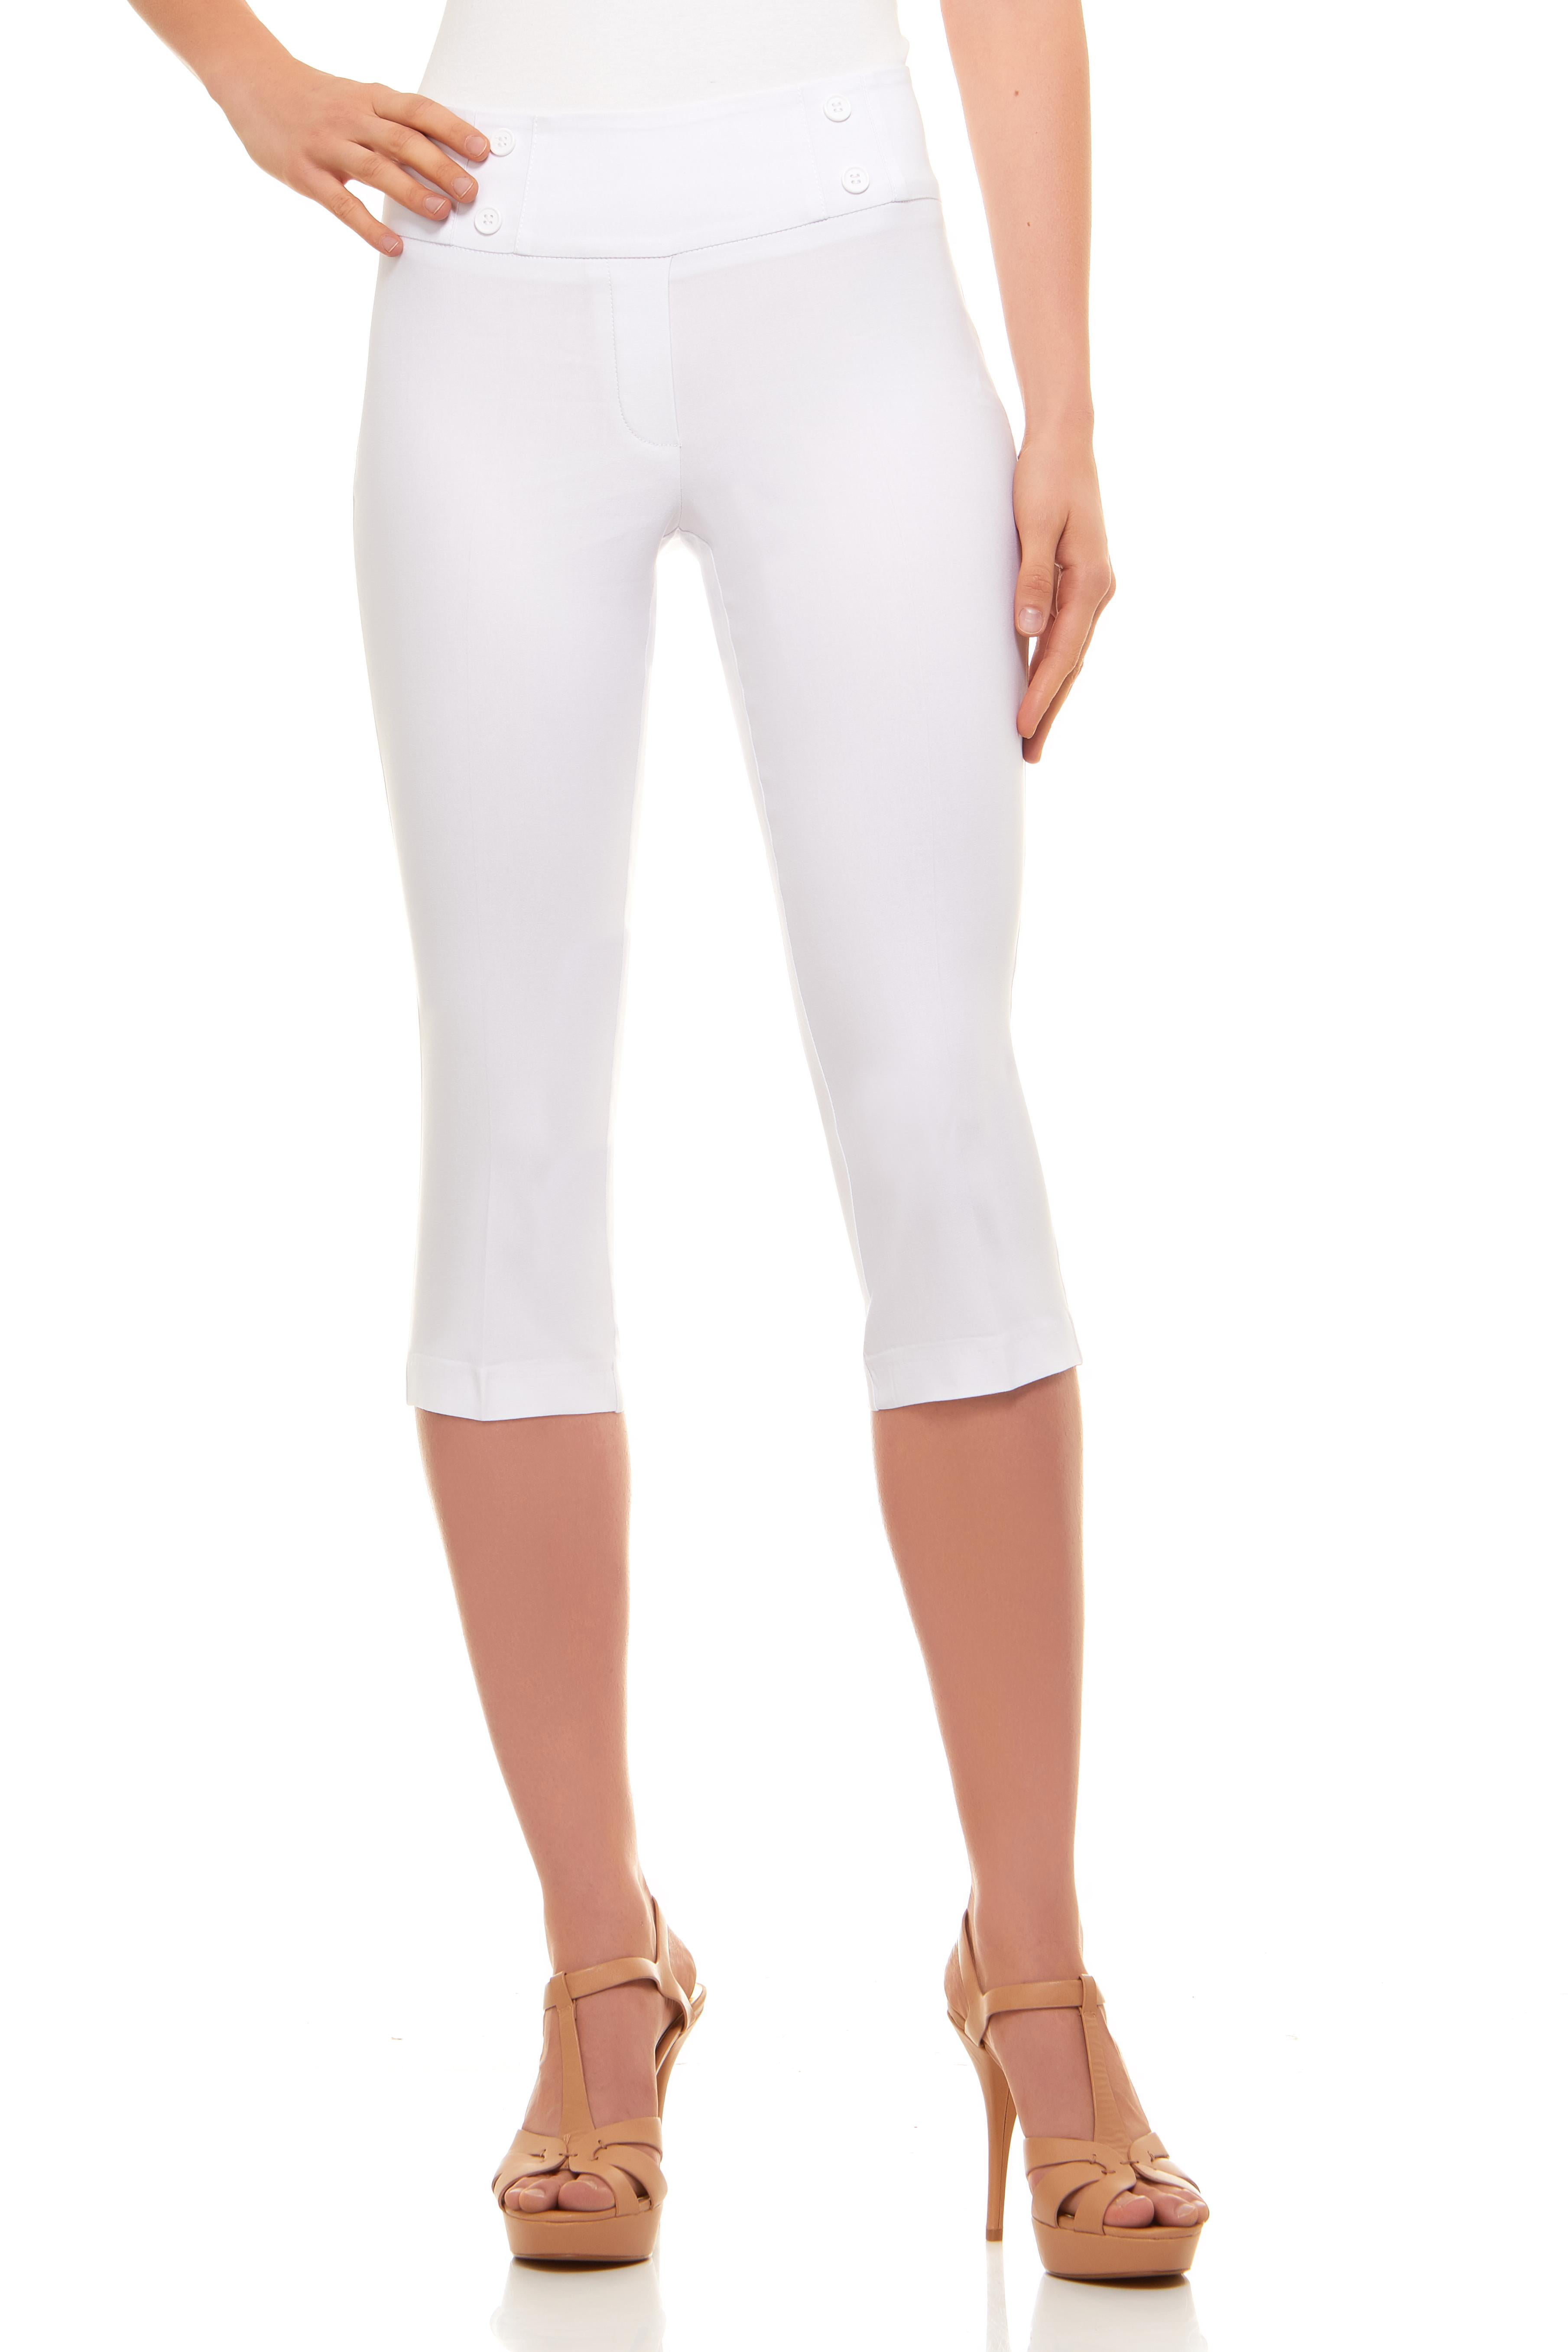 Velucci - Womens Classic Fit Capri Pants - Comfortable Pull On Style ...